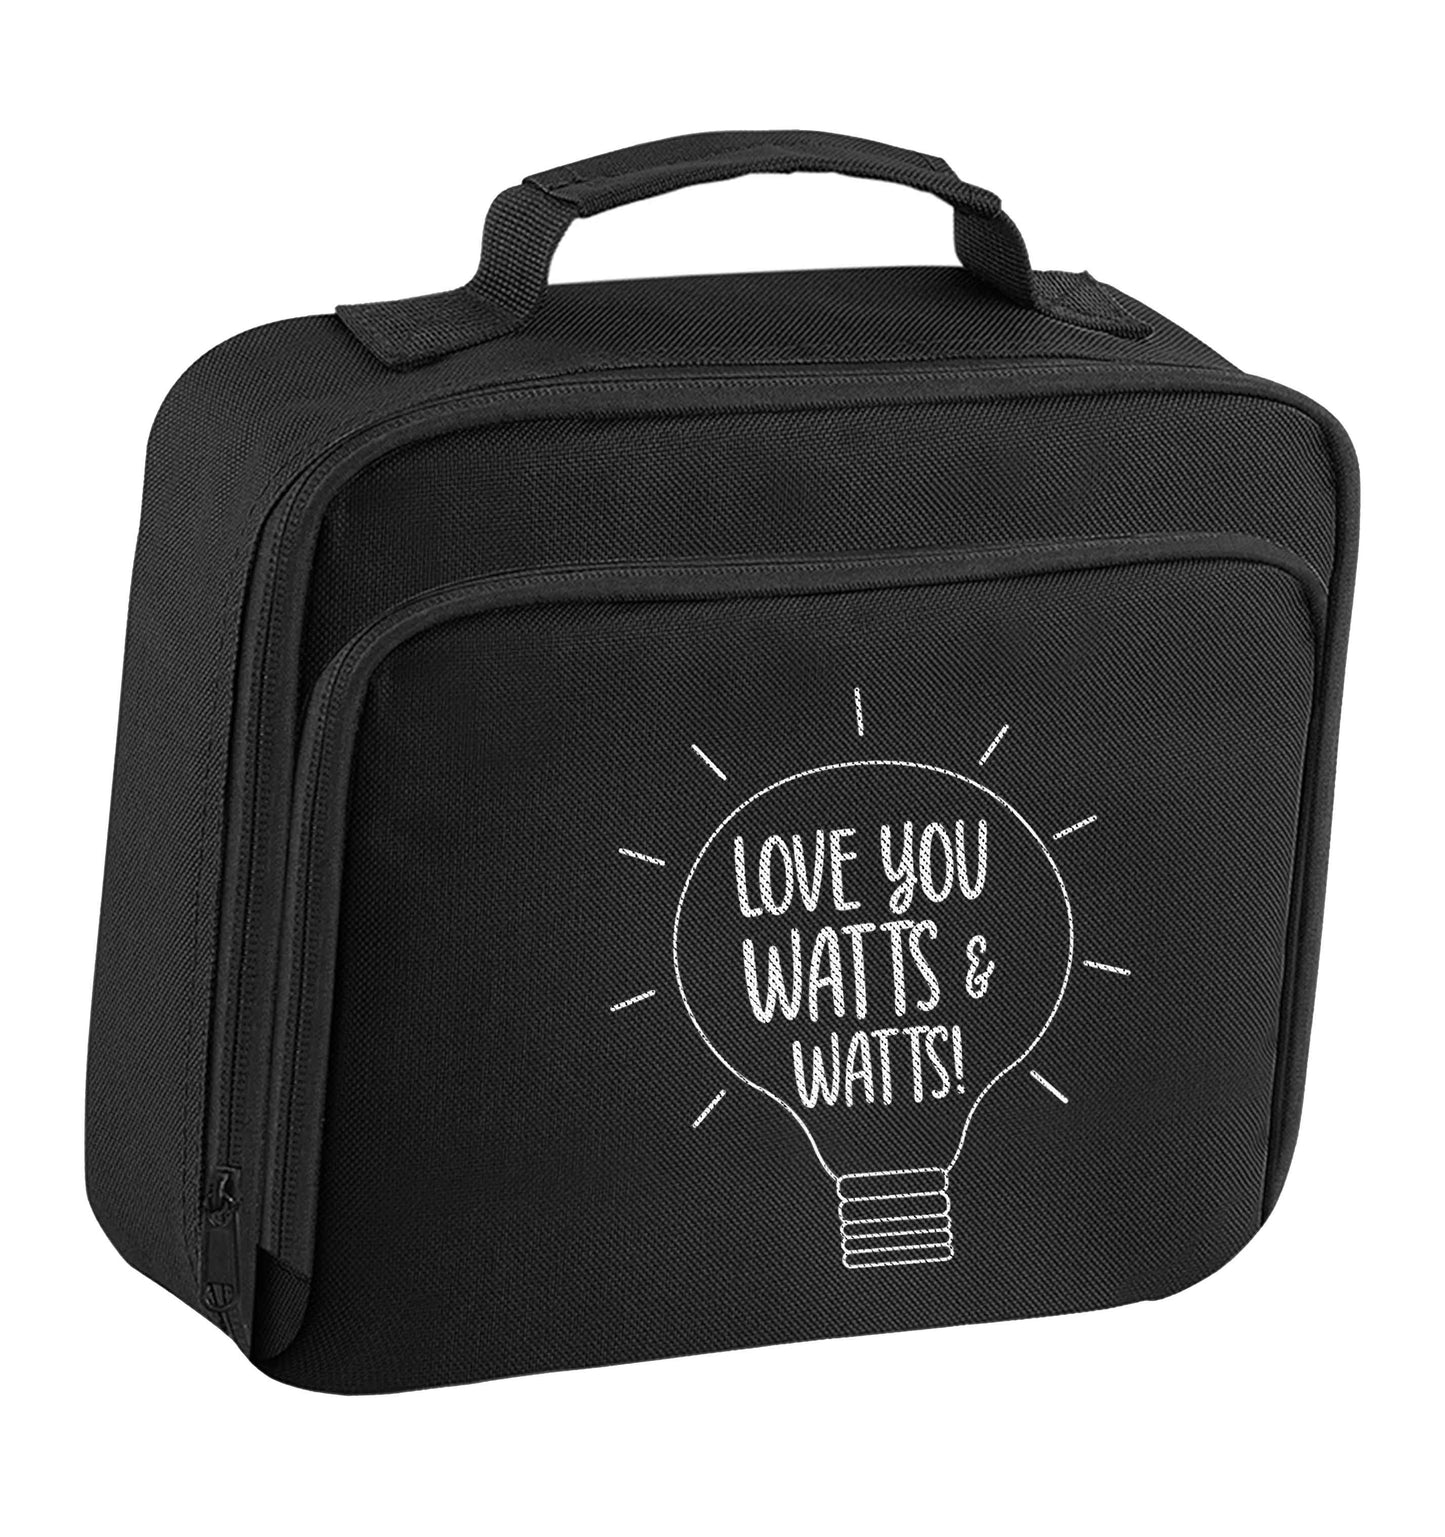 I love you watts and watts insulated black lunch bag cooler